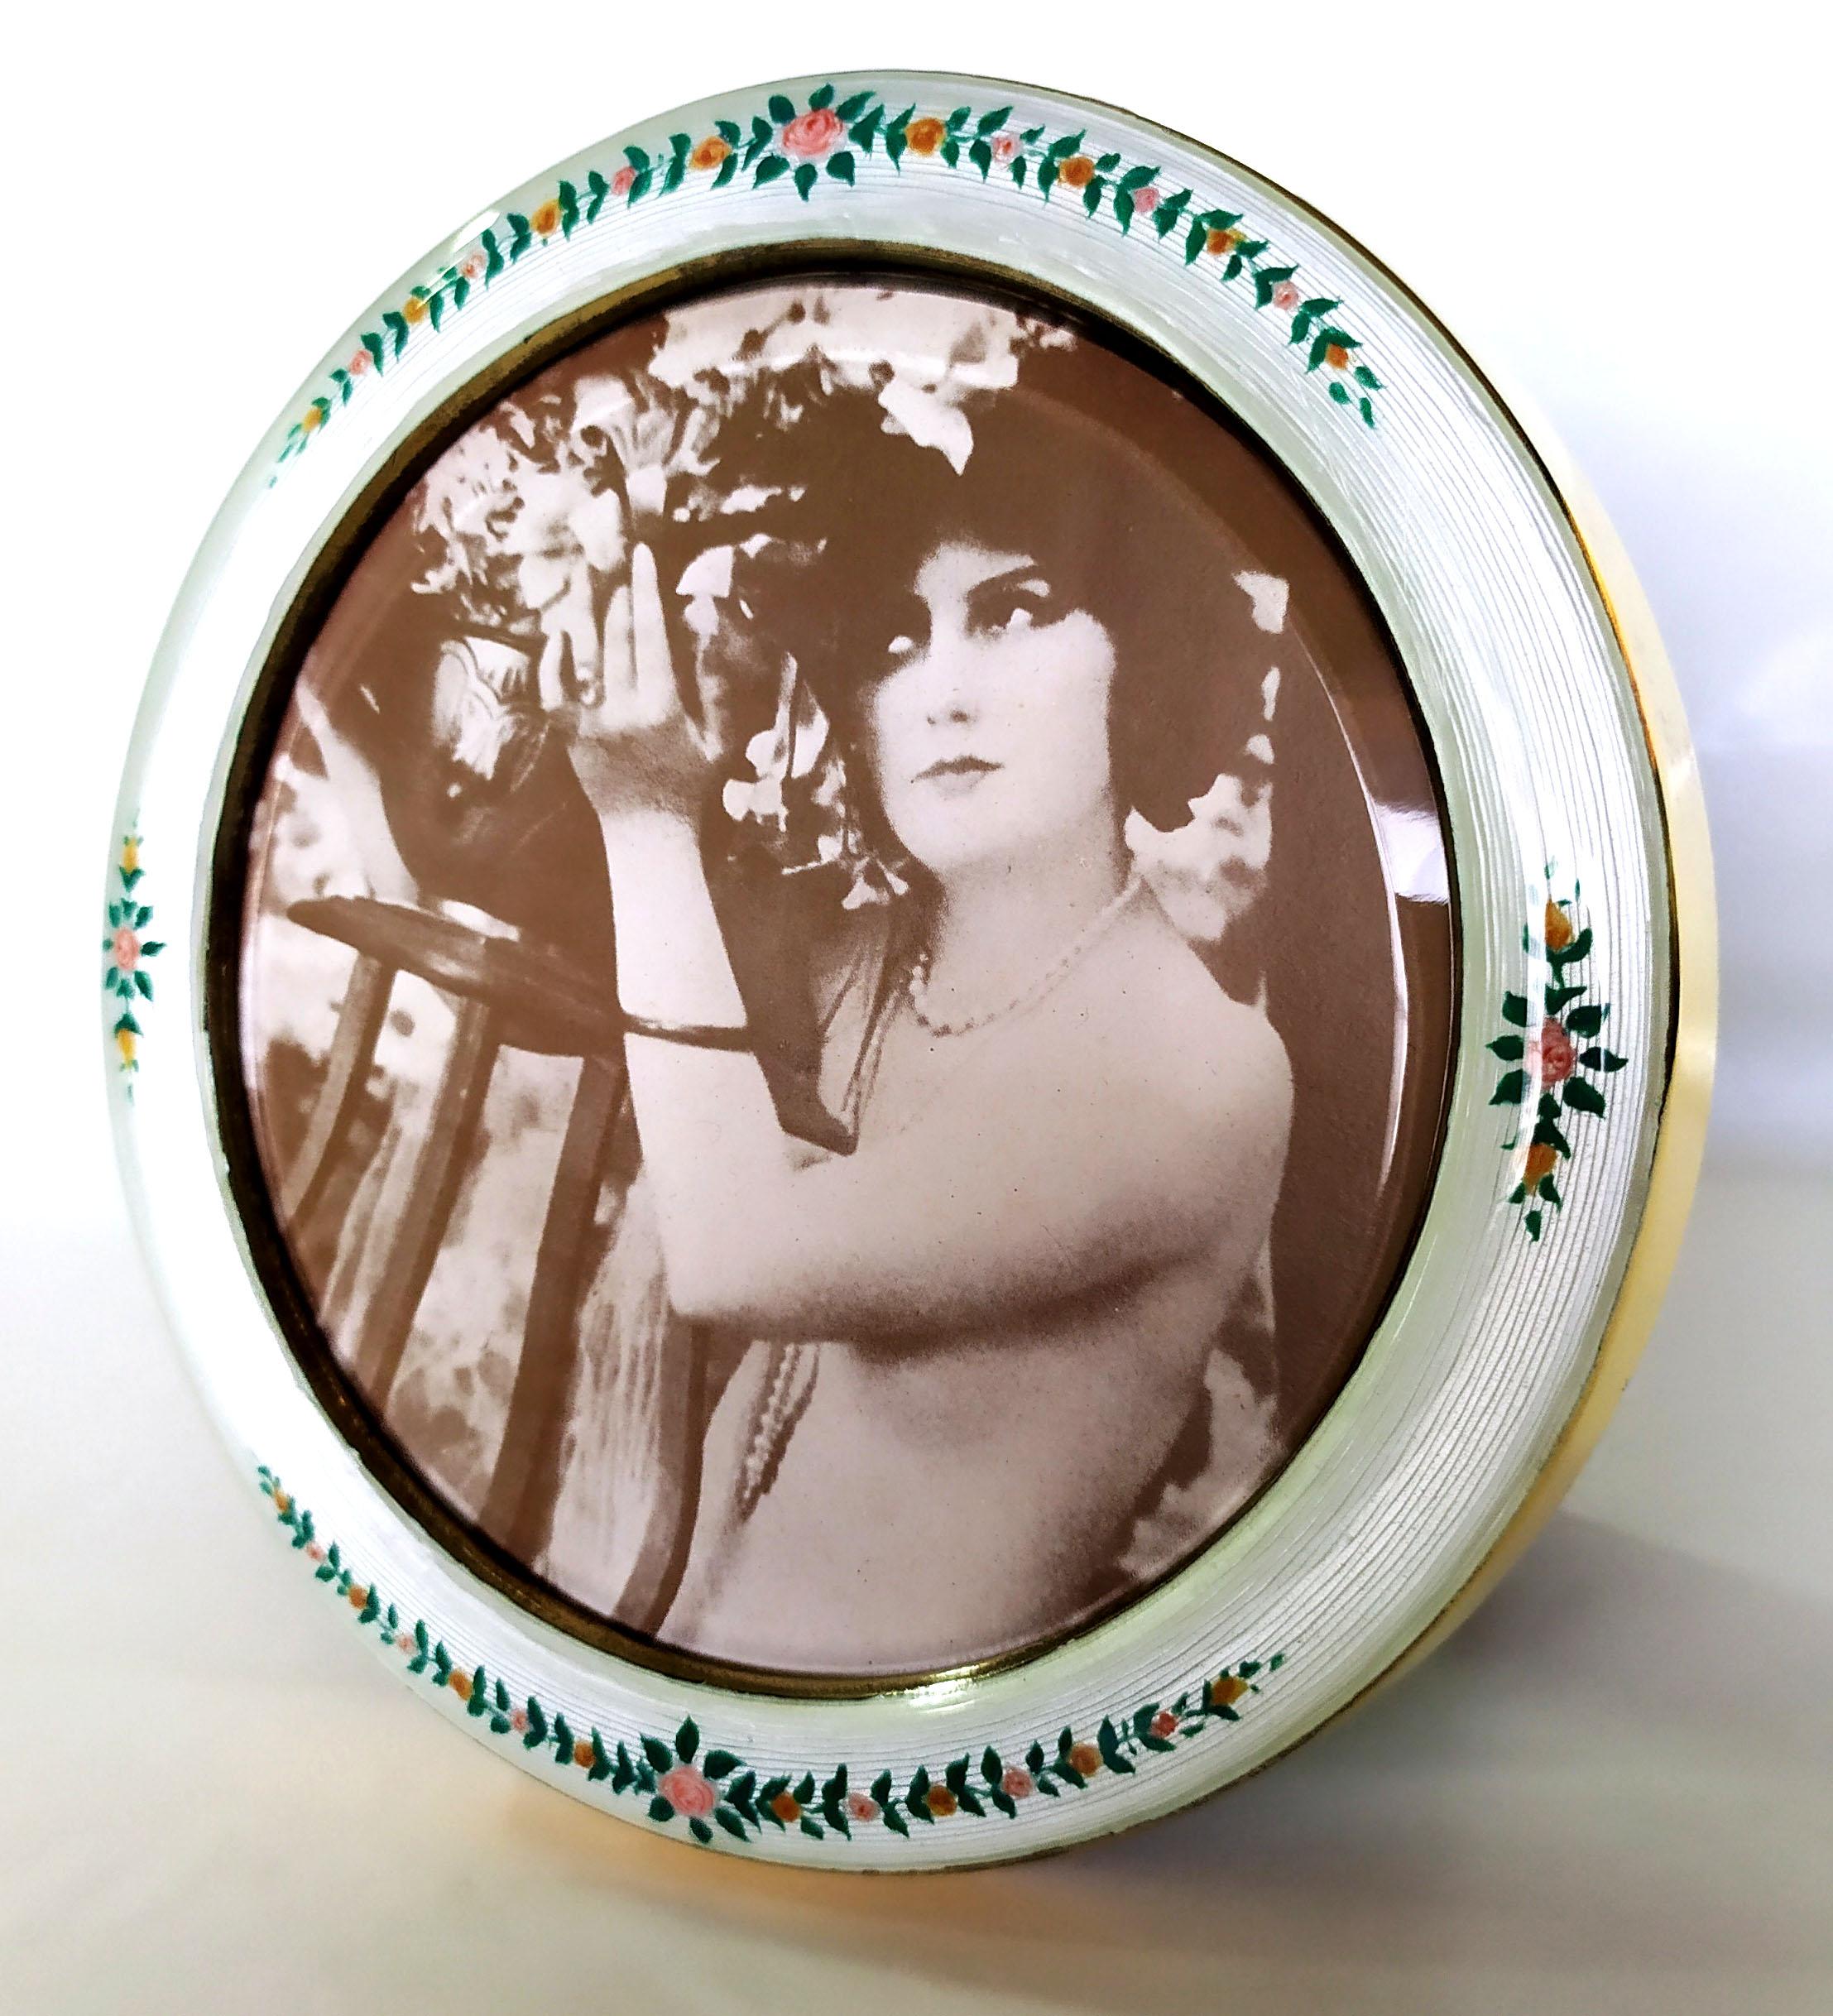 Round photo frame in 925/1000 sterling silver gold plated with translucent fired enamel on guillochè and hand-painted miniature of garlands of flowers in the late 1800s Viennese Art Nouveau style. External diameter cm. 14 internal cm. 11. Weight gr.